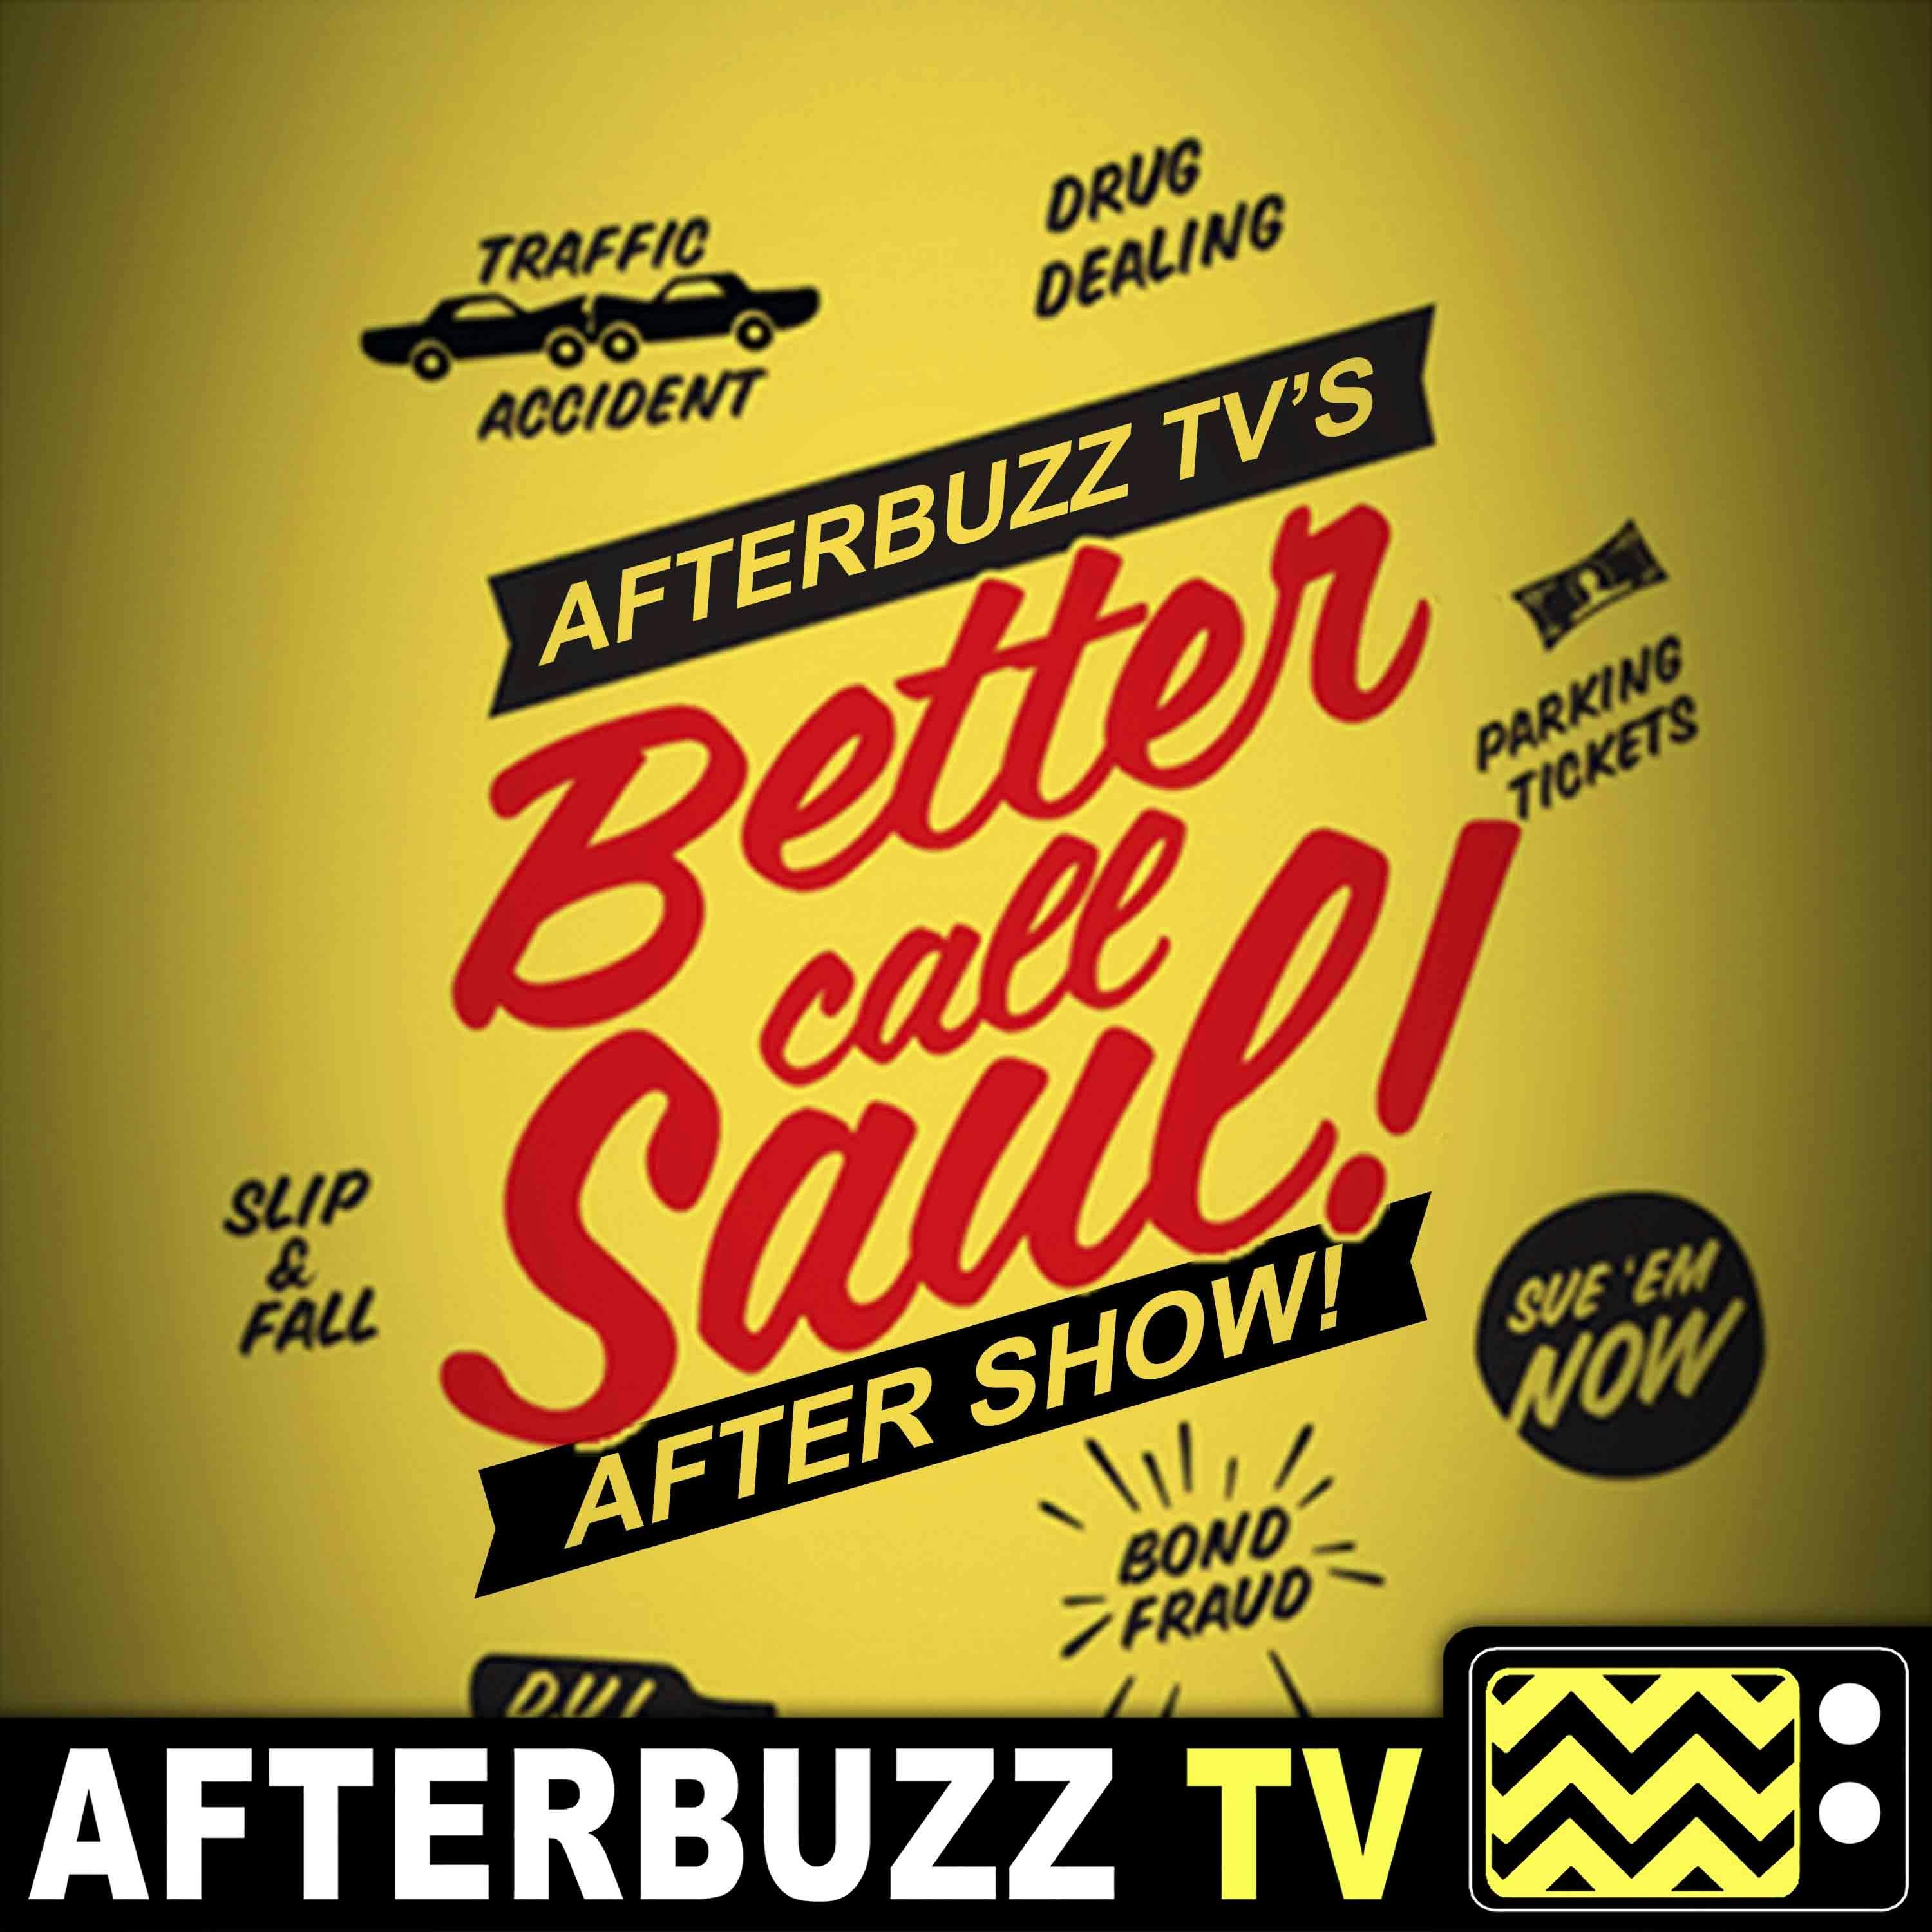 Better Call Saul S:2 | Gloves Off E:4 | AfterBuzz TV AfterShow